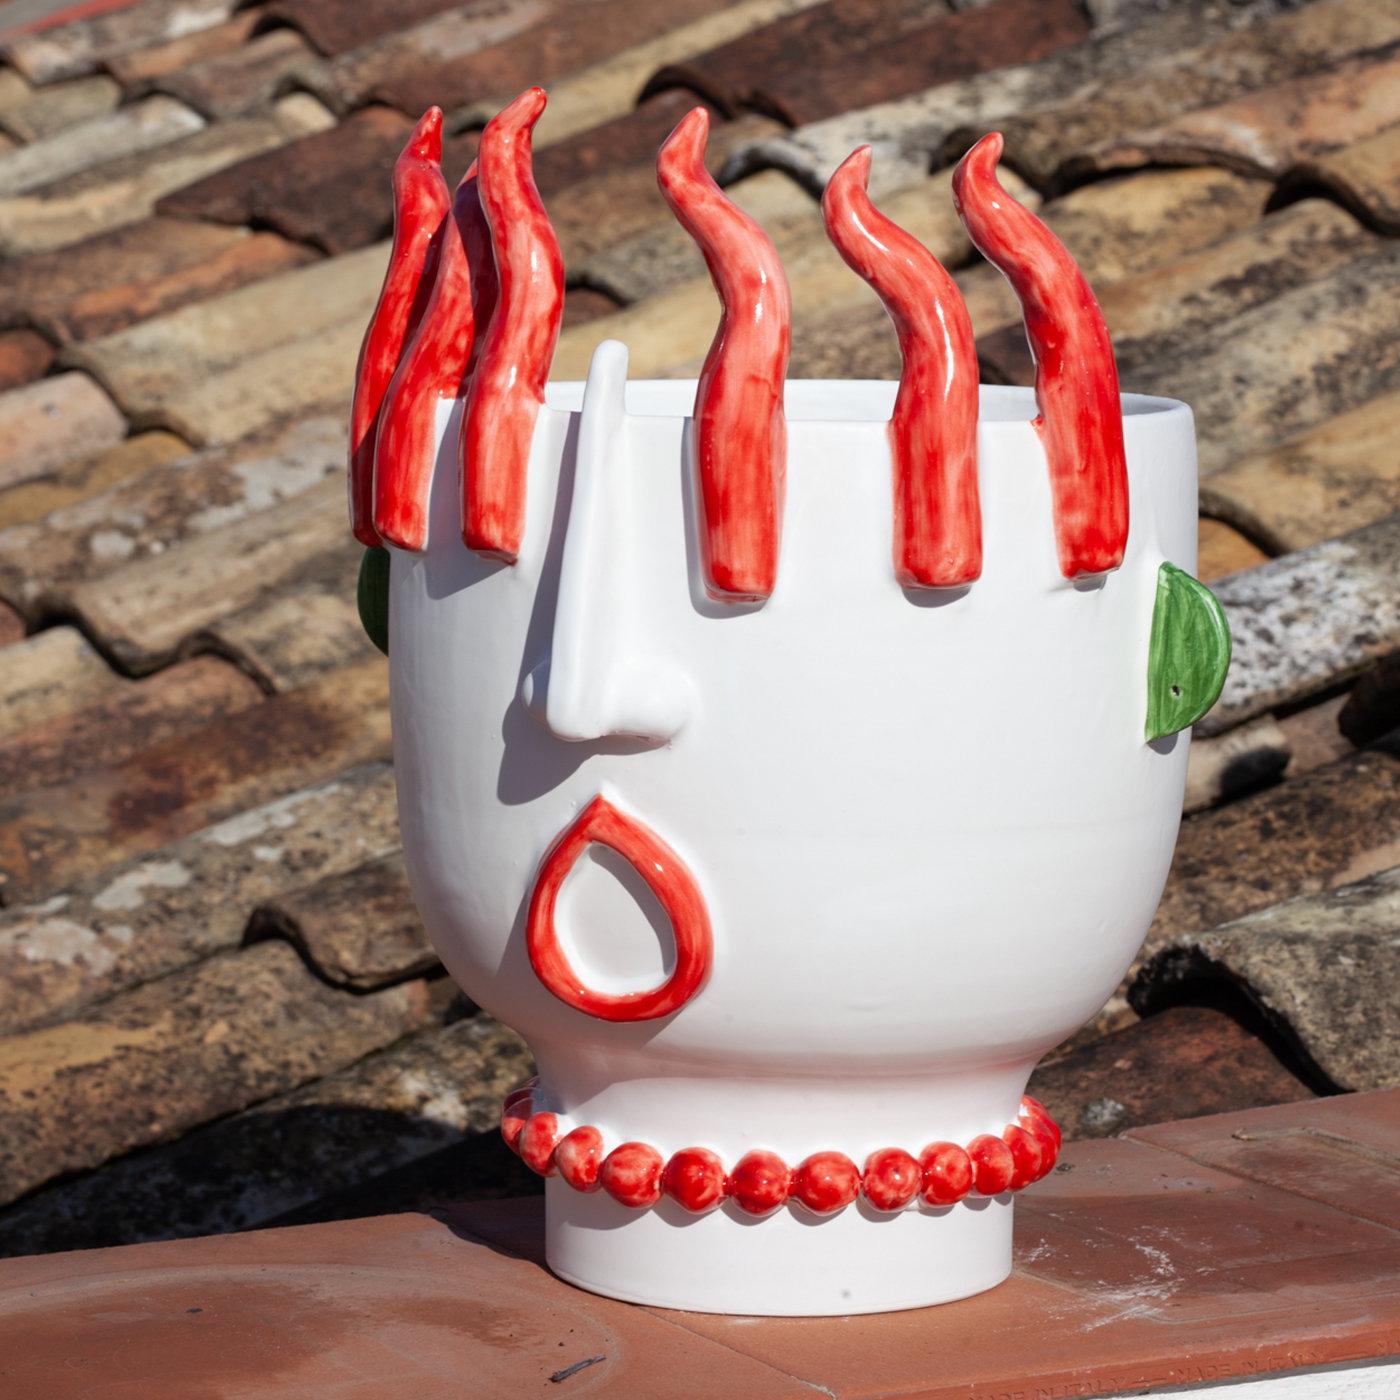 This striking sculpture/vase results from the impeccable mastery and visionary sensibility of ceramist Patrizia Italiano that personally handcrafts each piece. Part of a series dedicated to Sicilian street vendors, this superb anthropomorphic piece